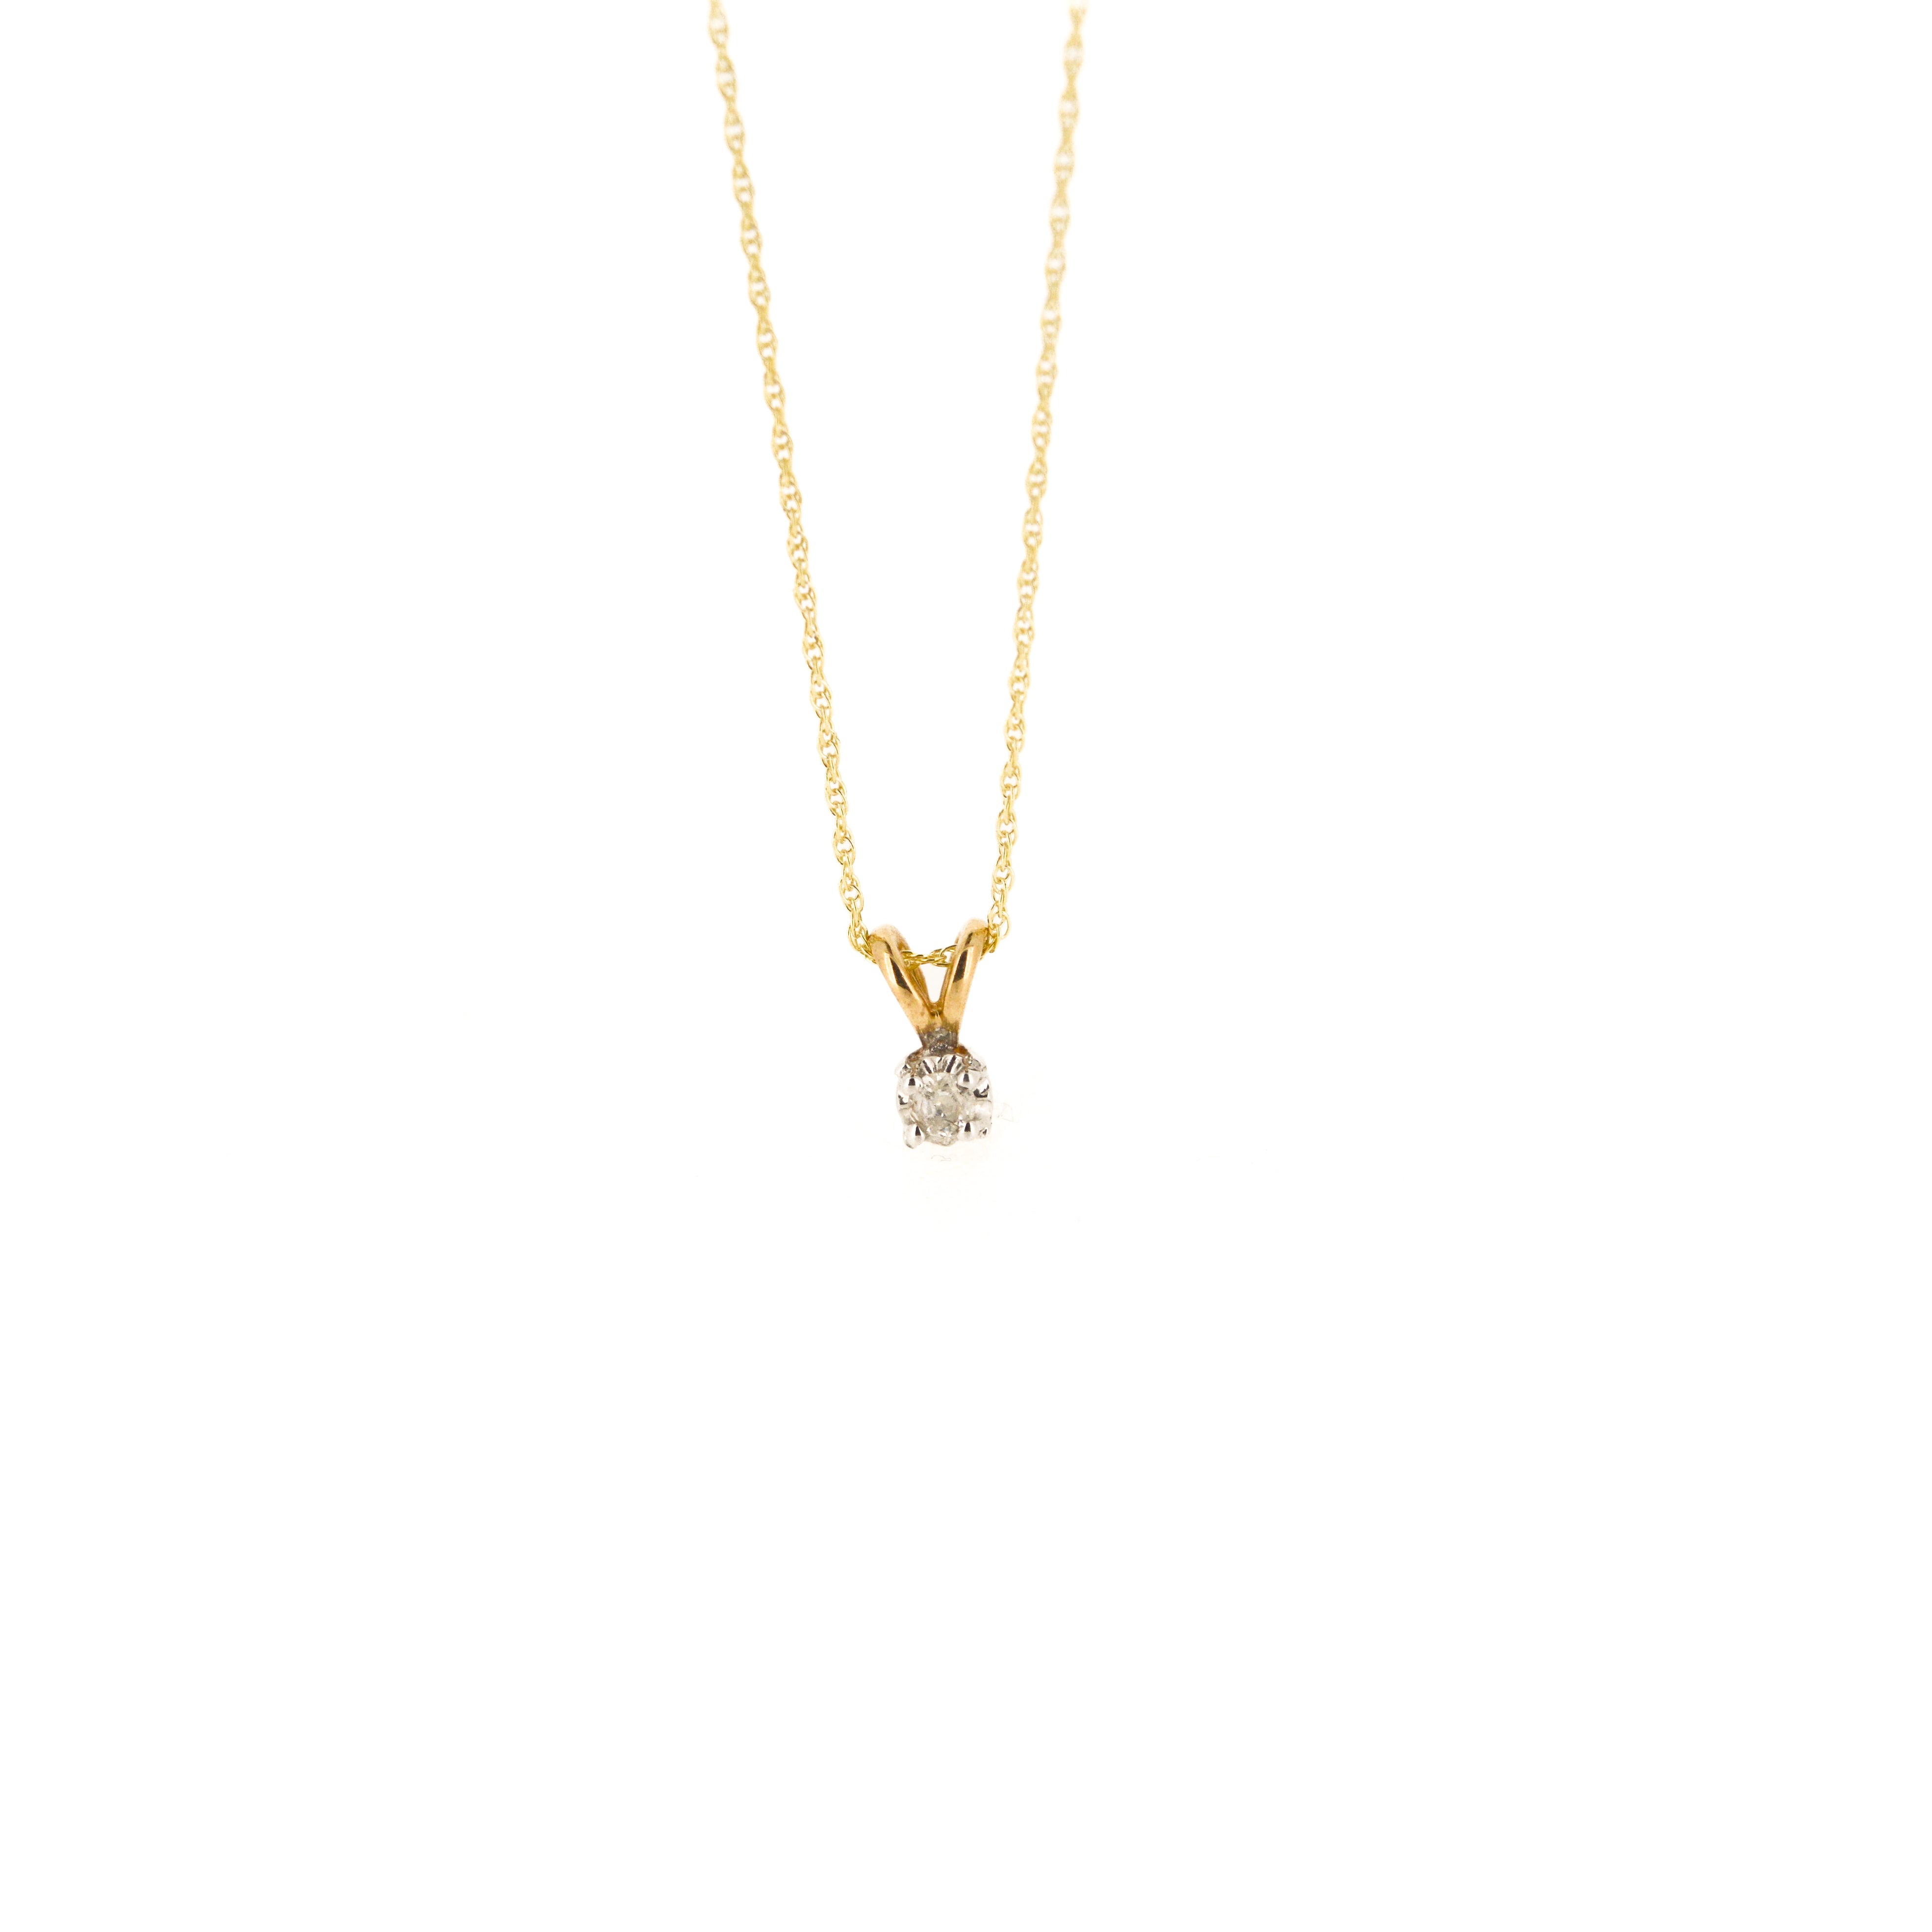 RESERVED 9ct Gold Diamond April Birthstone Necklace RESERVED